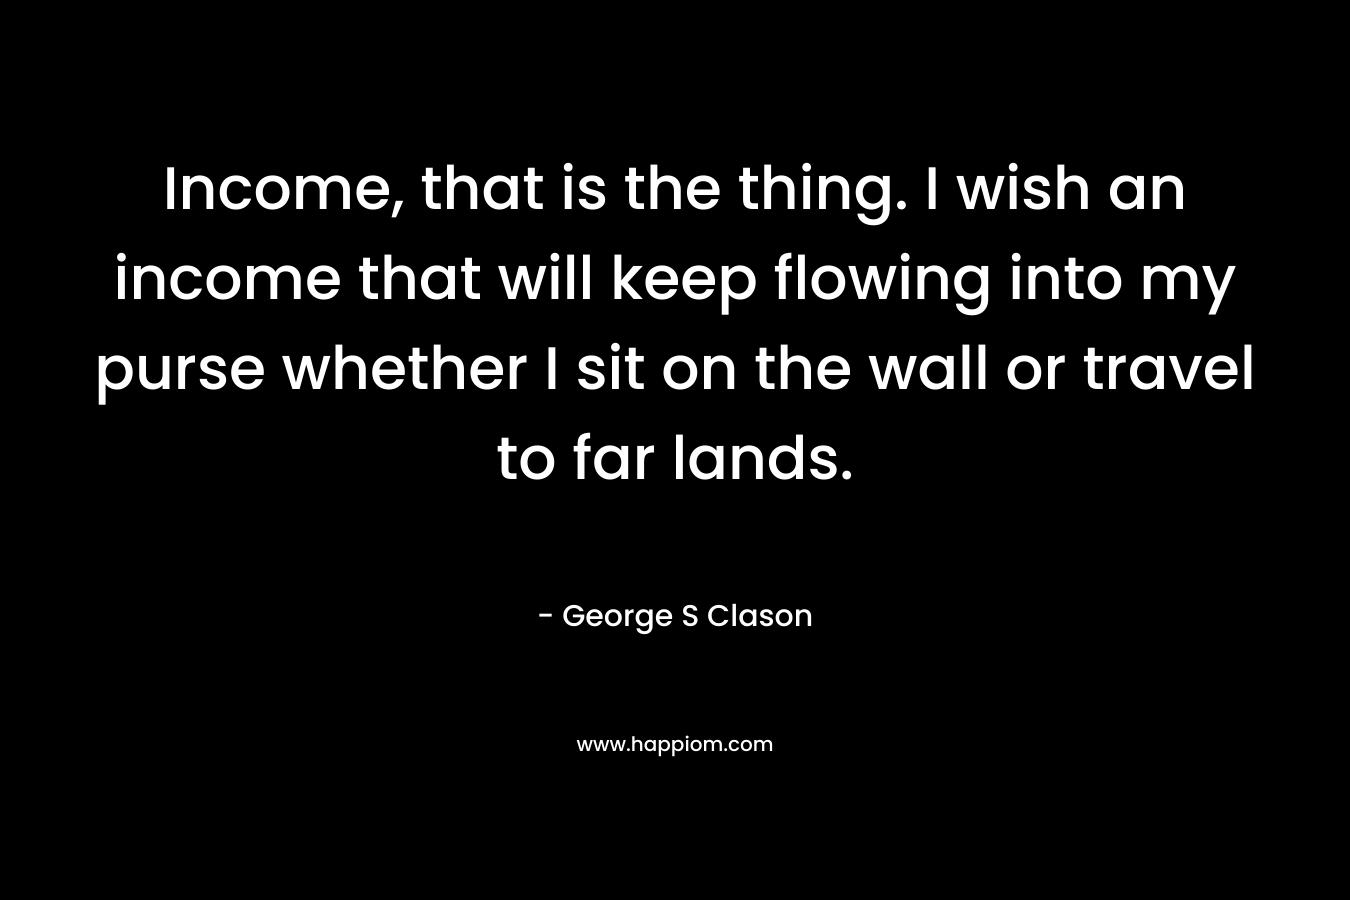 Income, that is the thing. I wish an income that will keep flowing into my purse whether I sit on the wall or travel to far lands. – George S Clason